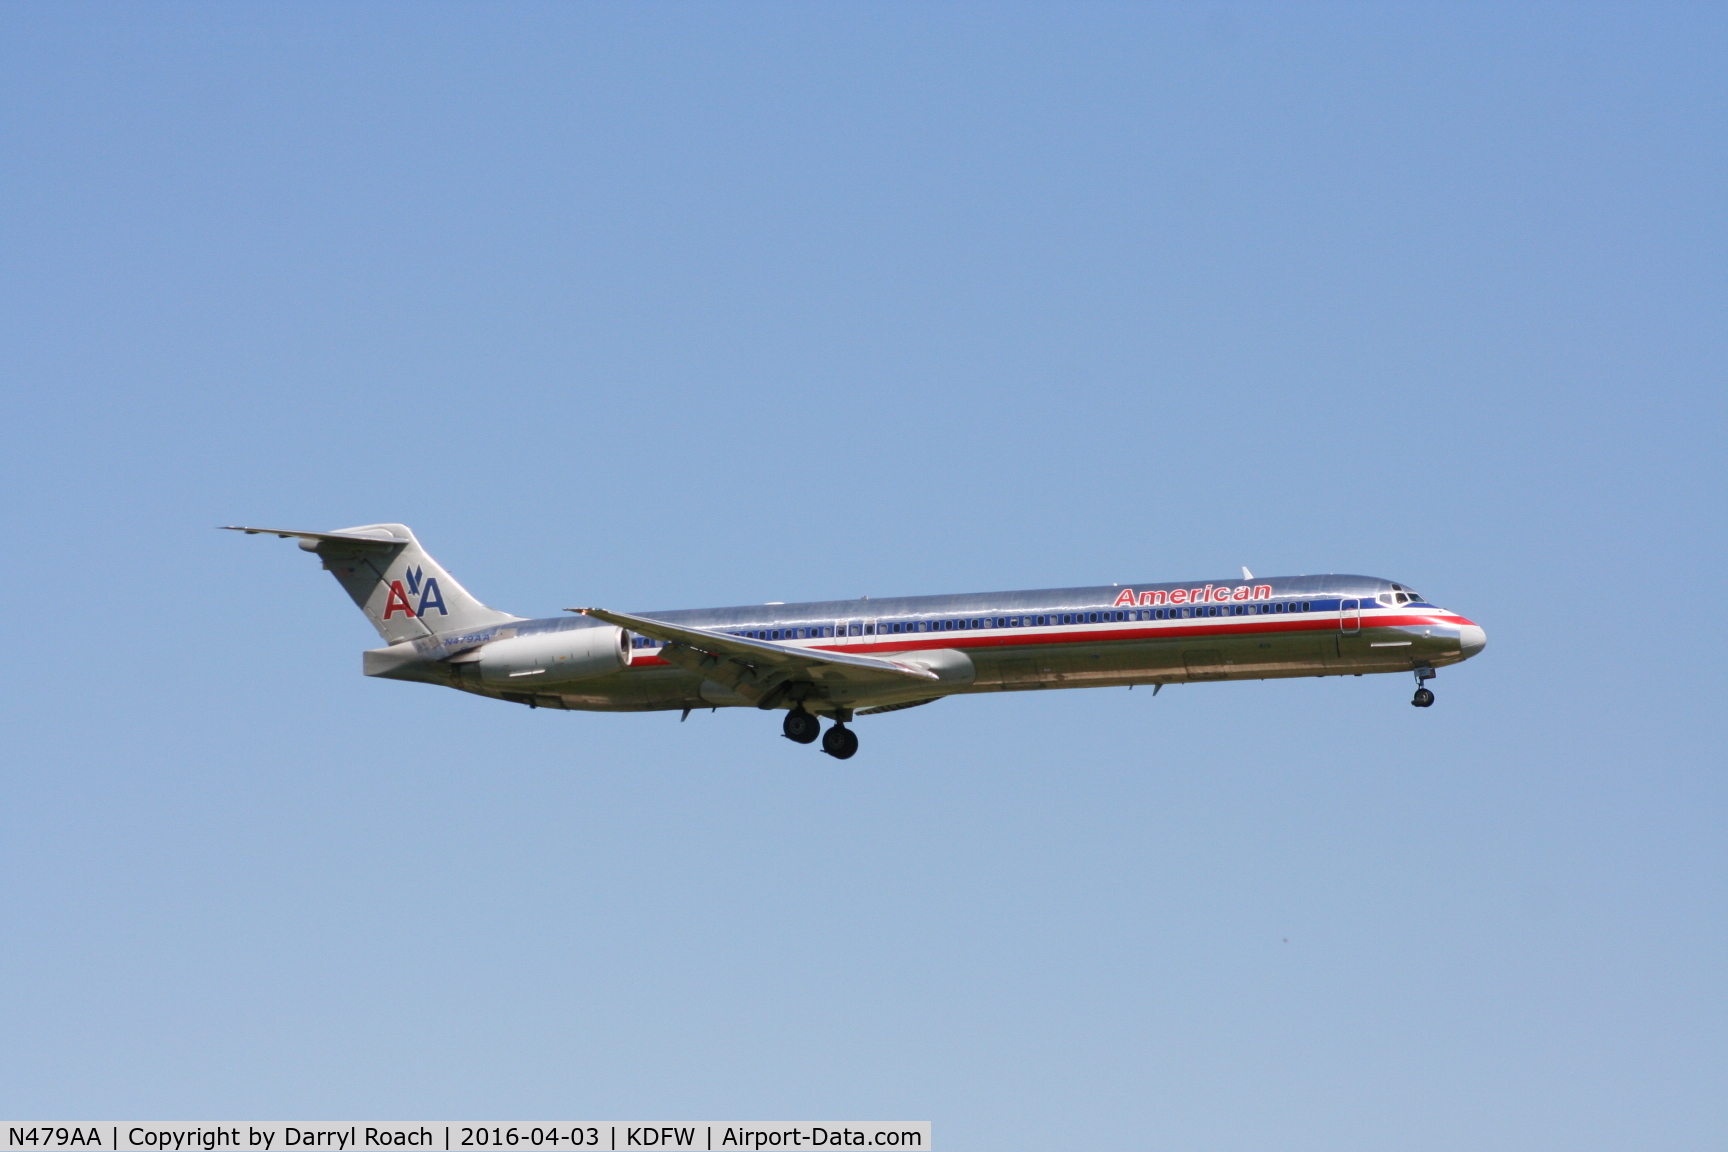 N479AA, 1988 McDonnell Douglas MD-82 (DC-9-82) C/N 49654, Another angle of AA's 479 about to touch 18R.